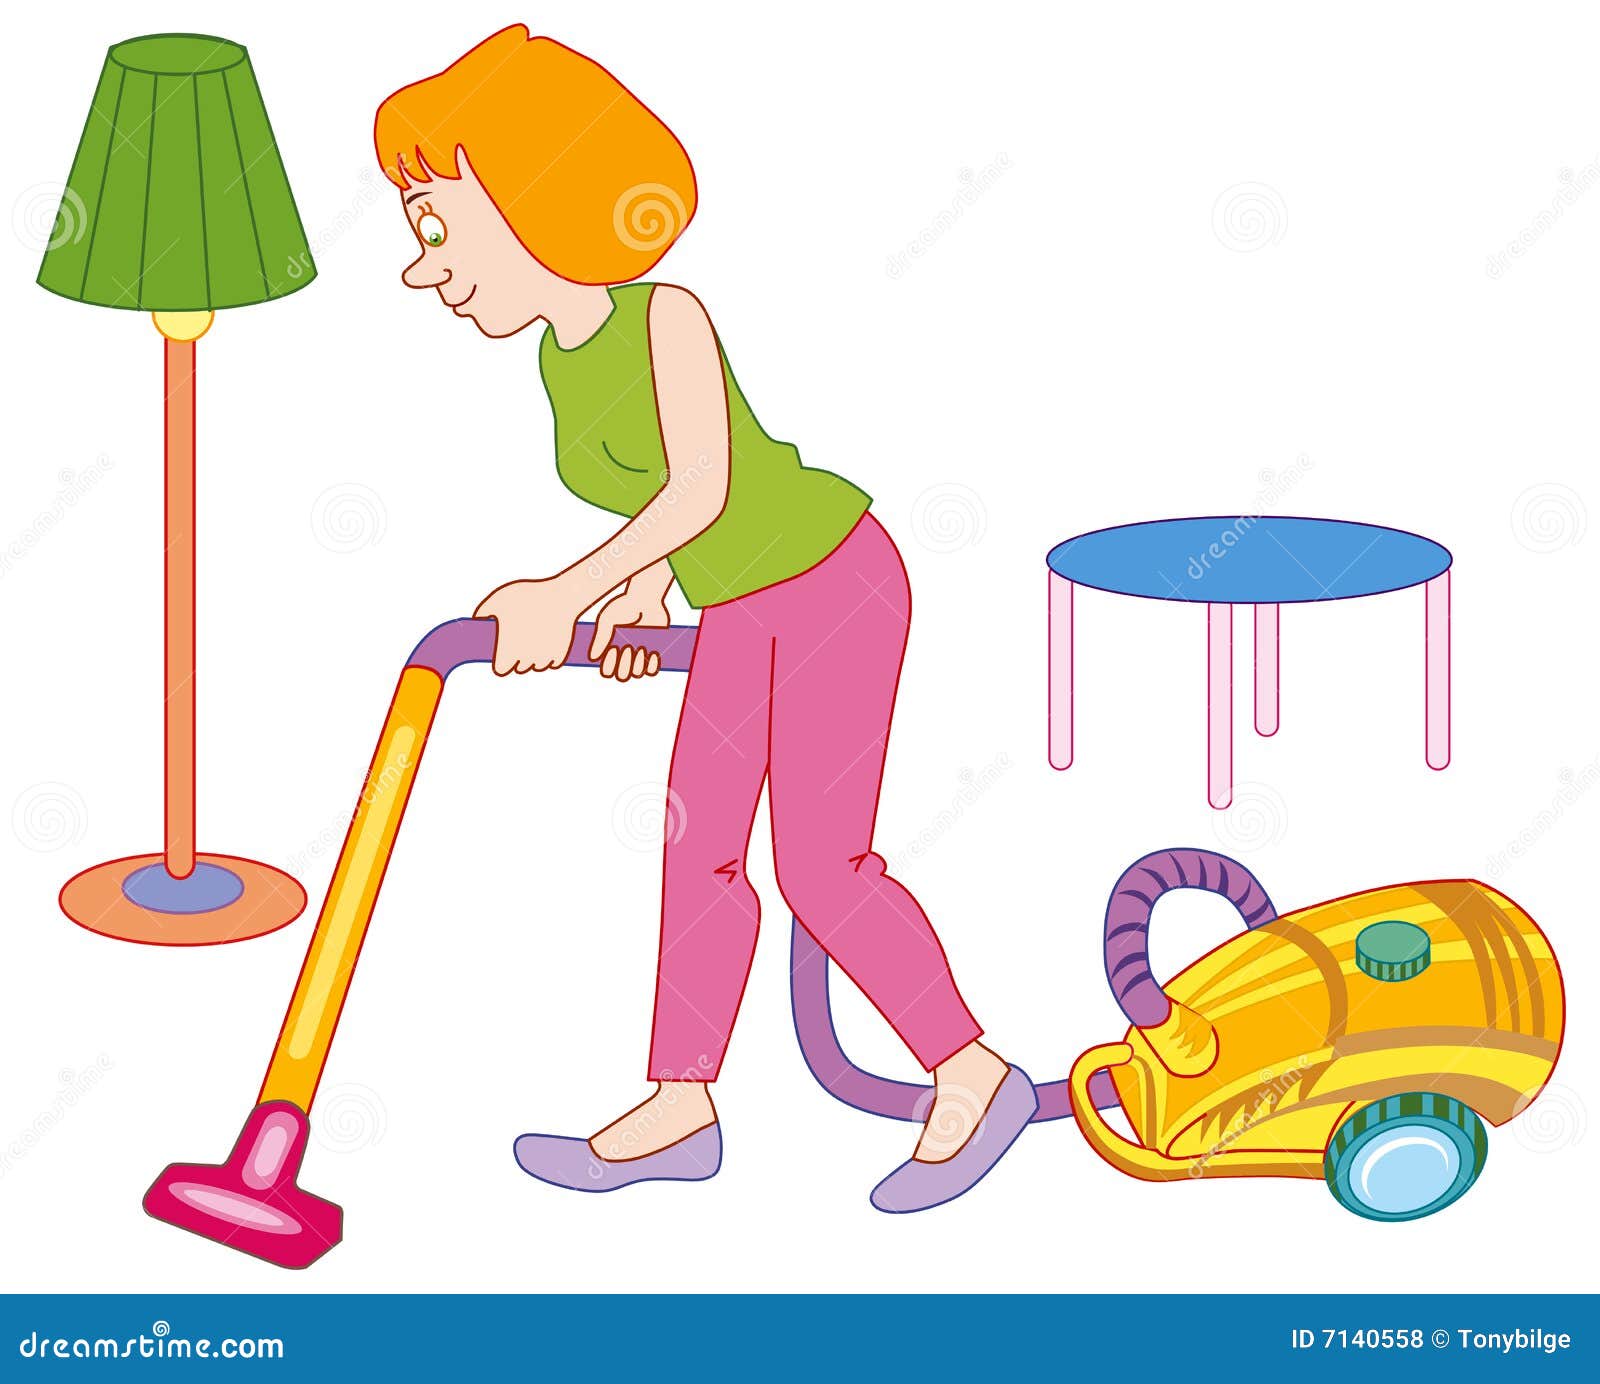 clipart house cleaning business - photo #29